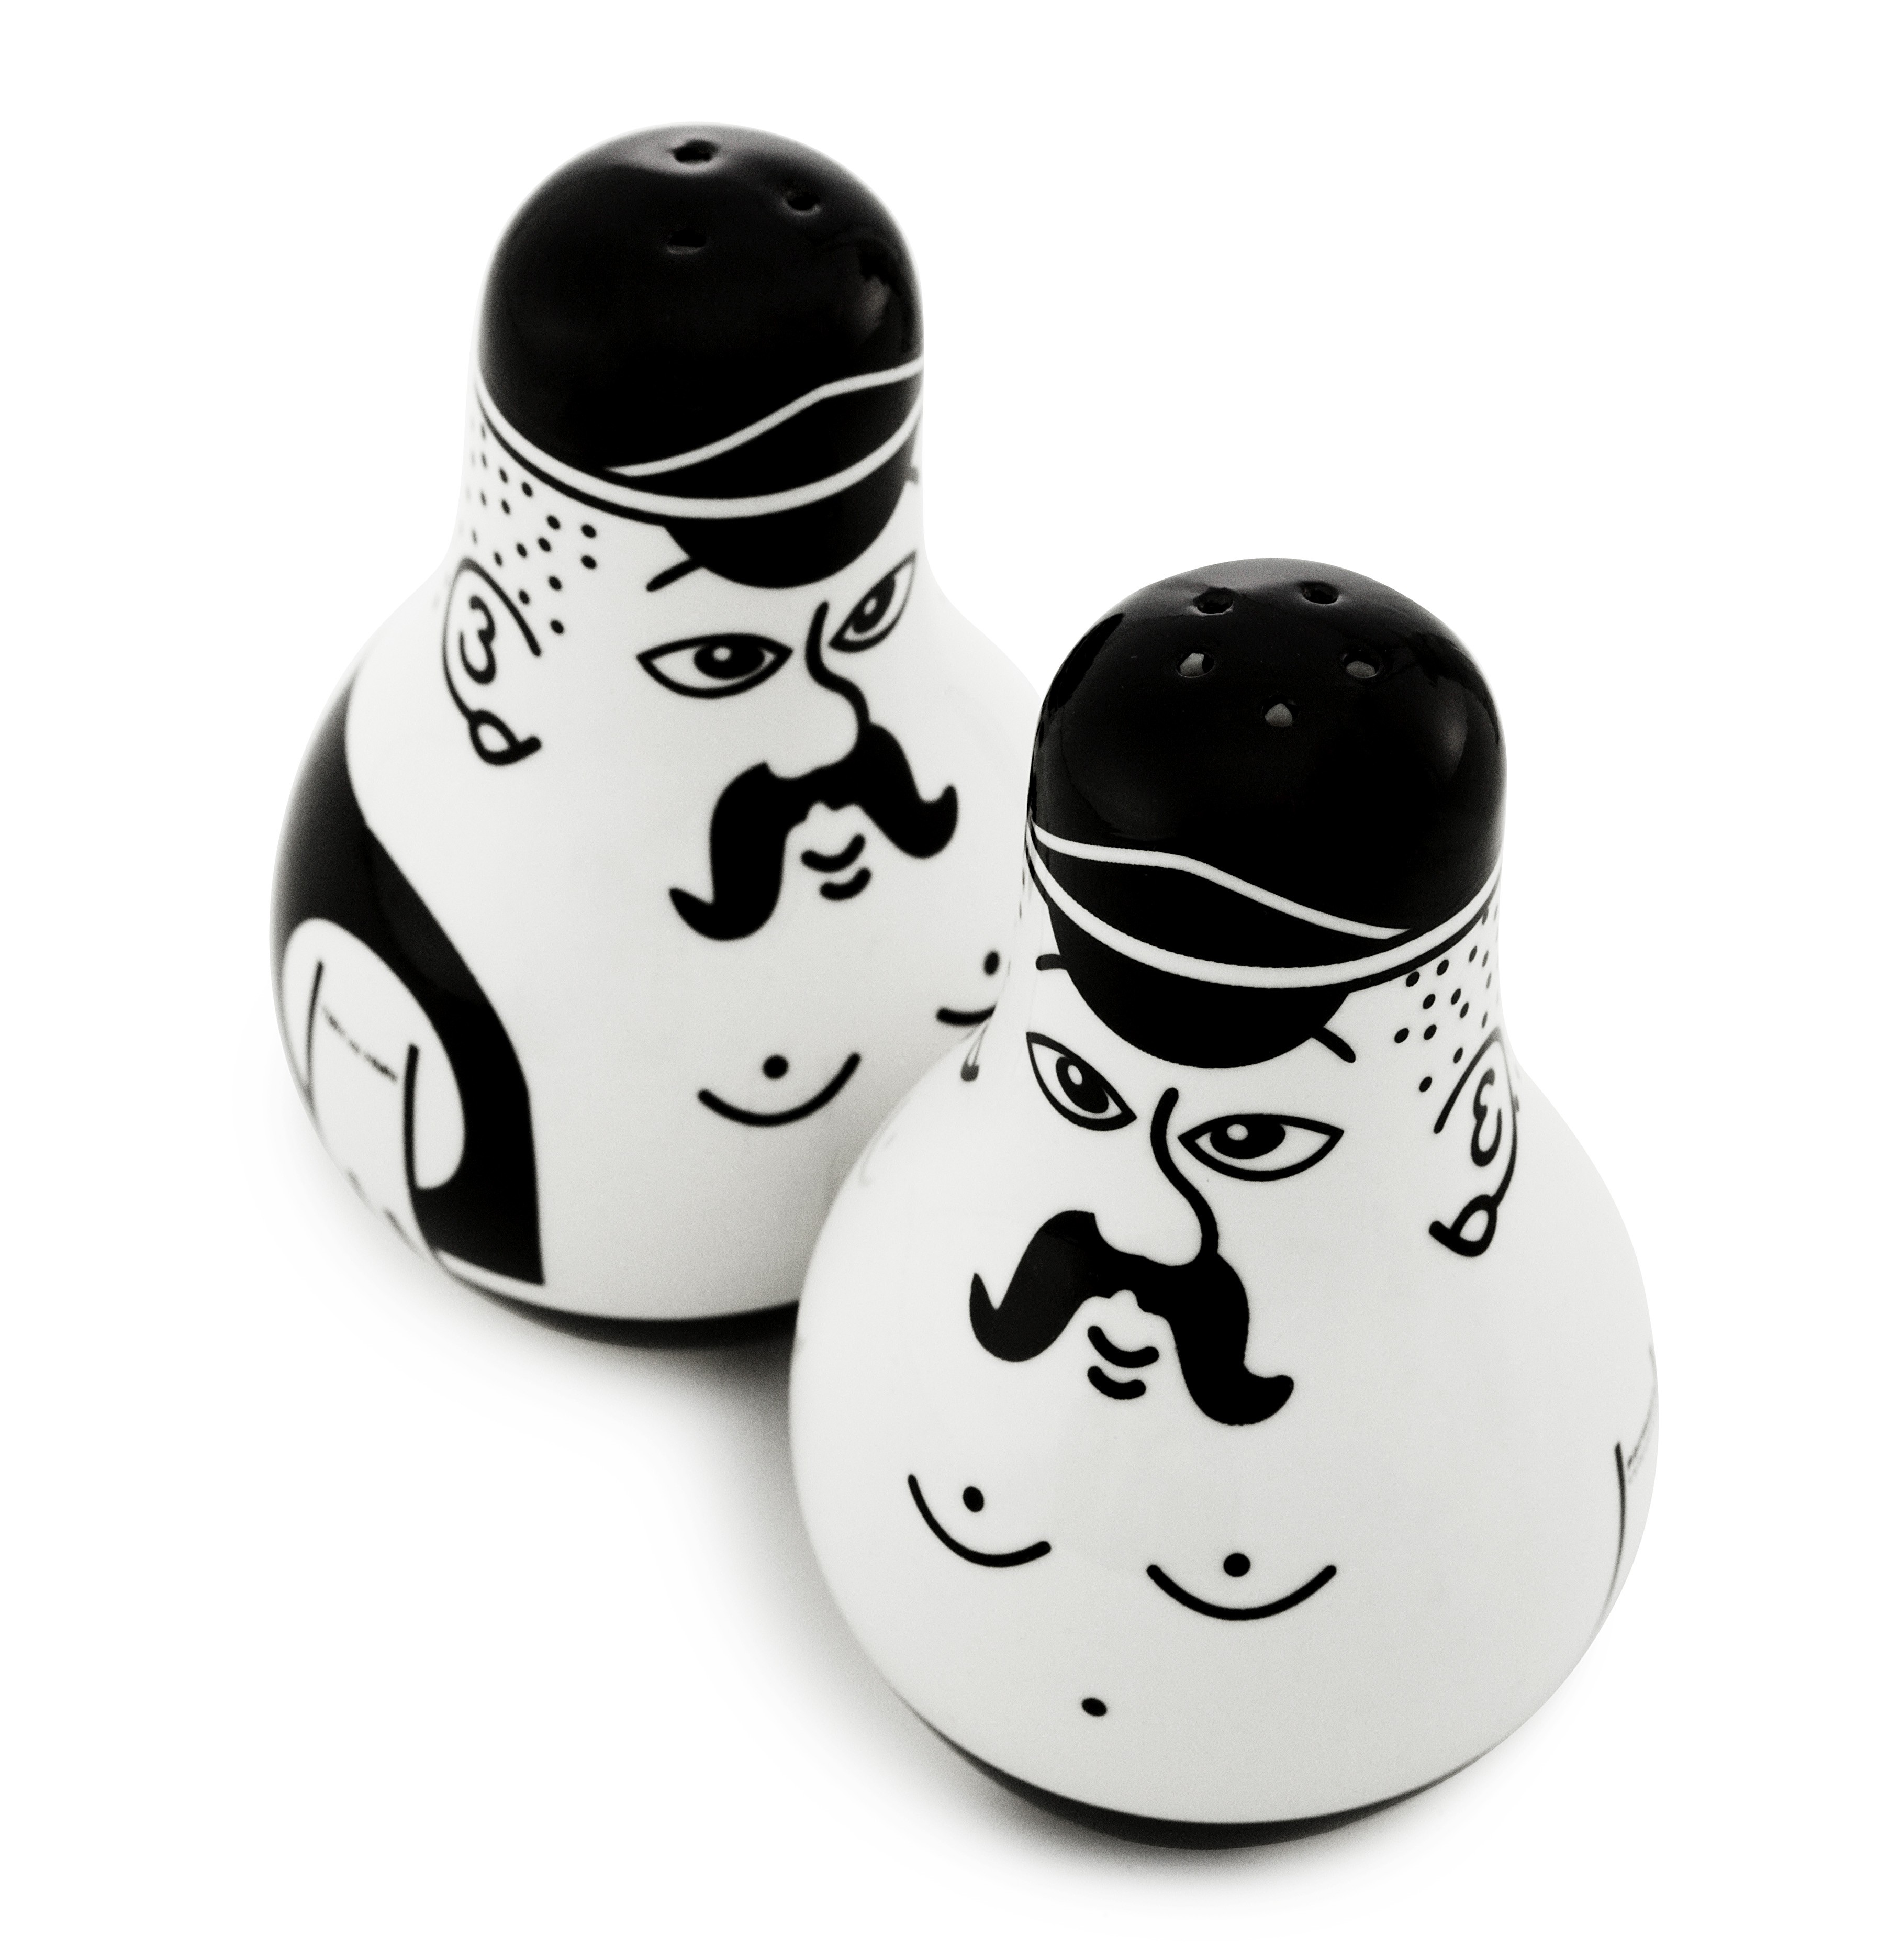 Add some personality to your tableware with these stylish salt and pepper shakers